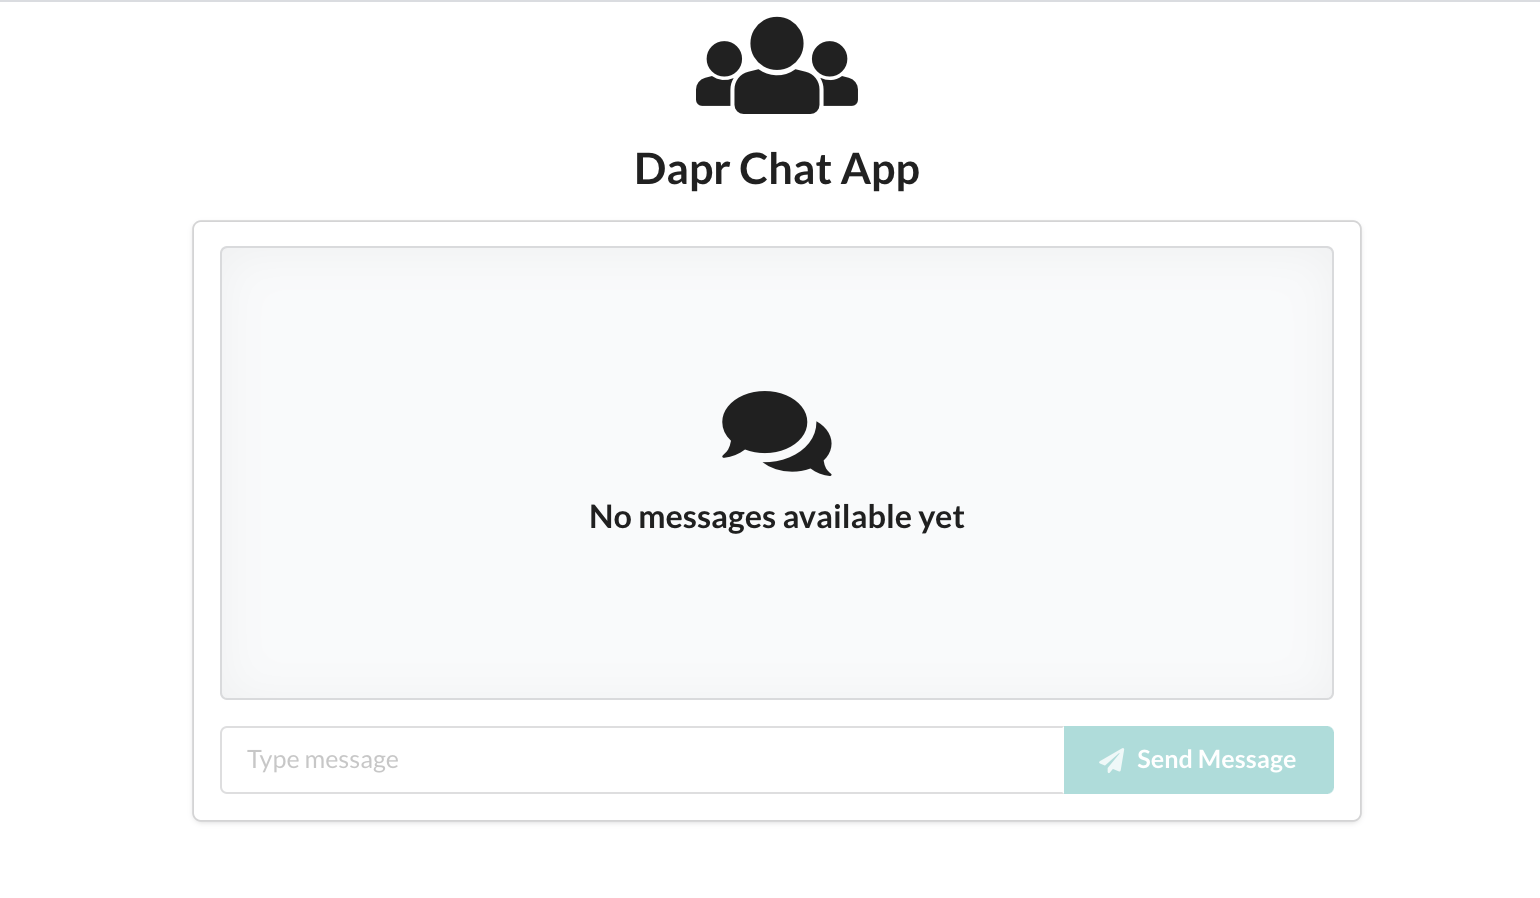 banner displaying that no messages have been received yet